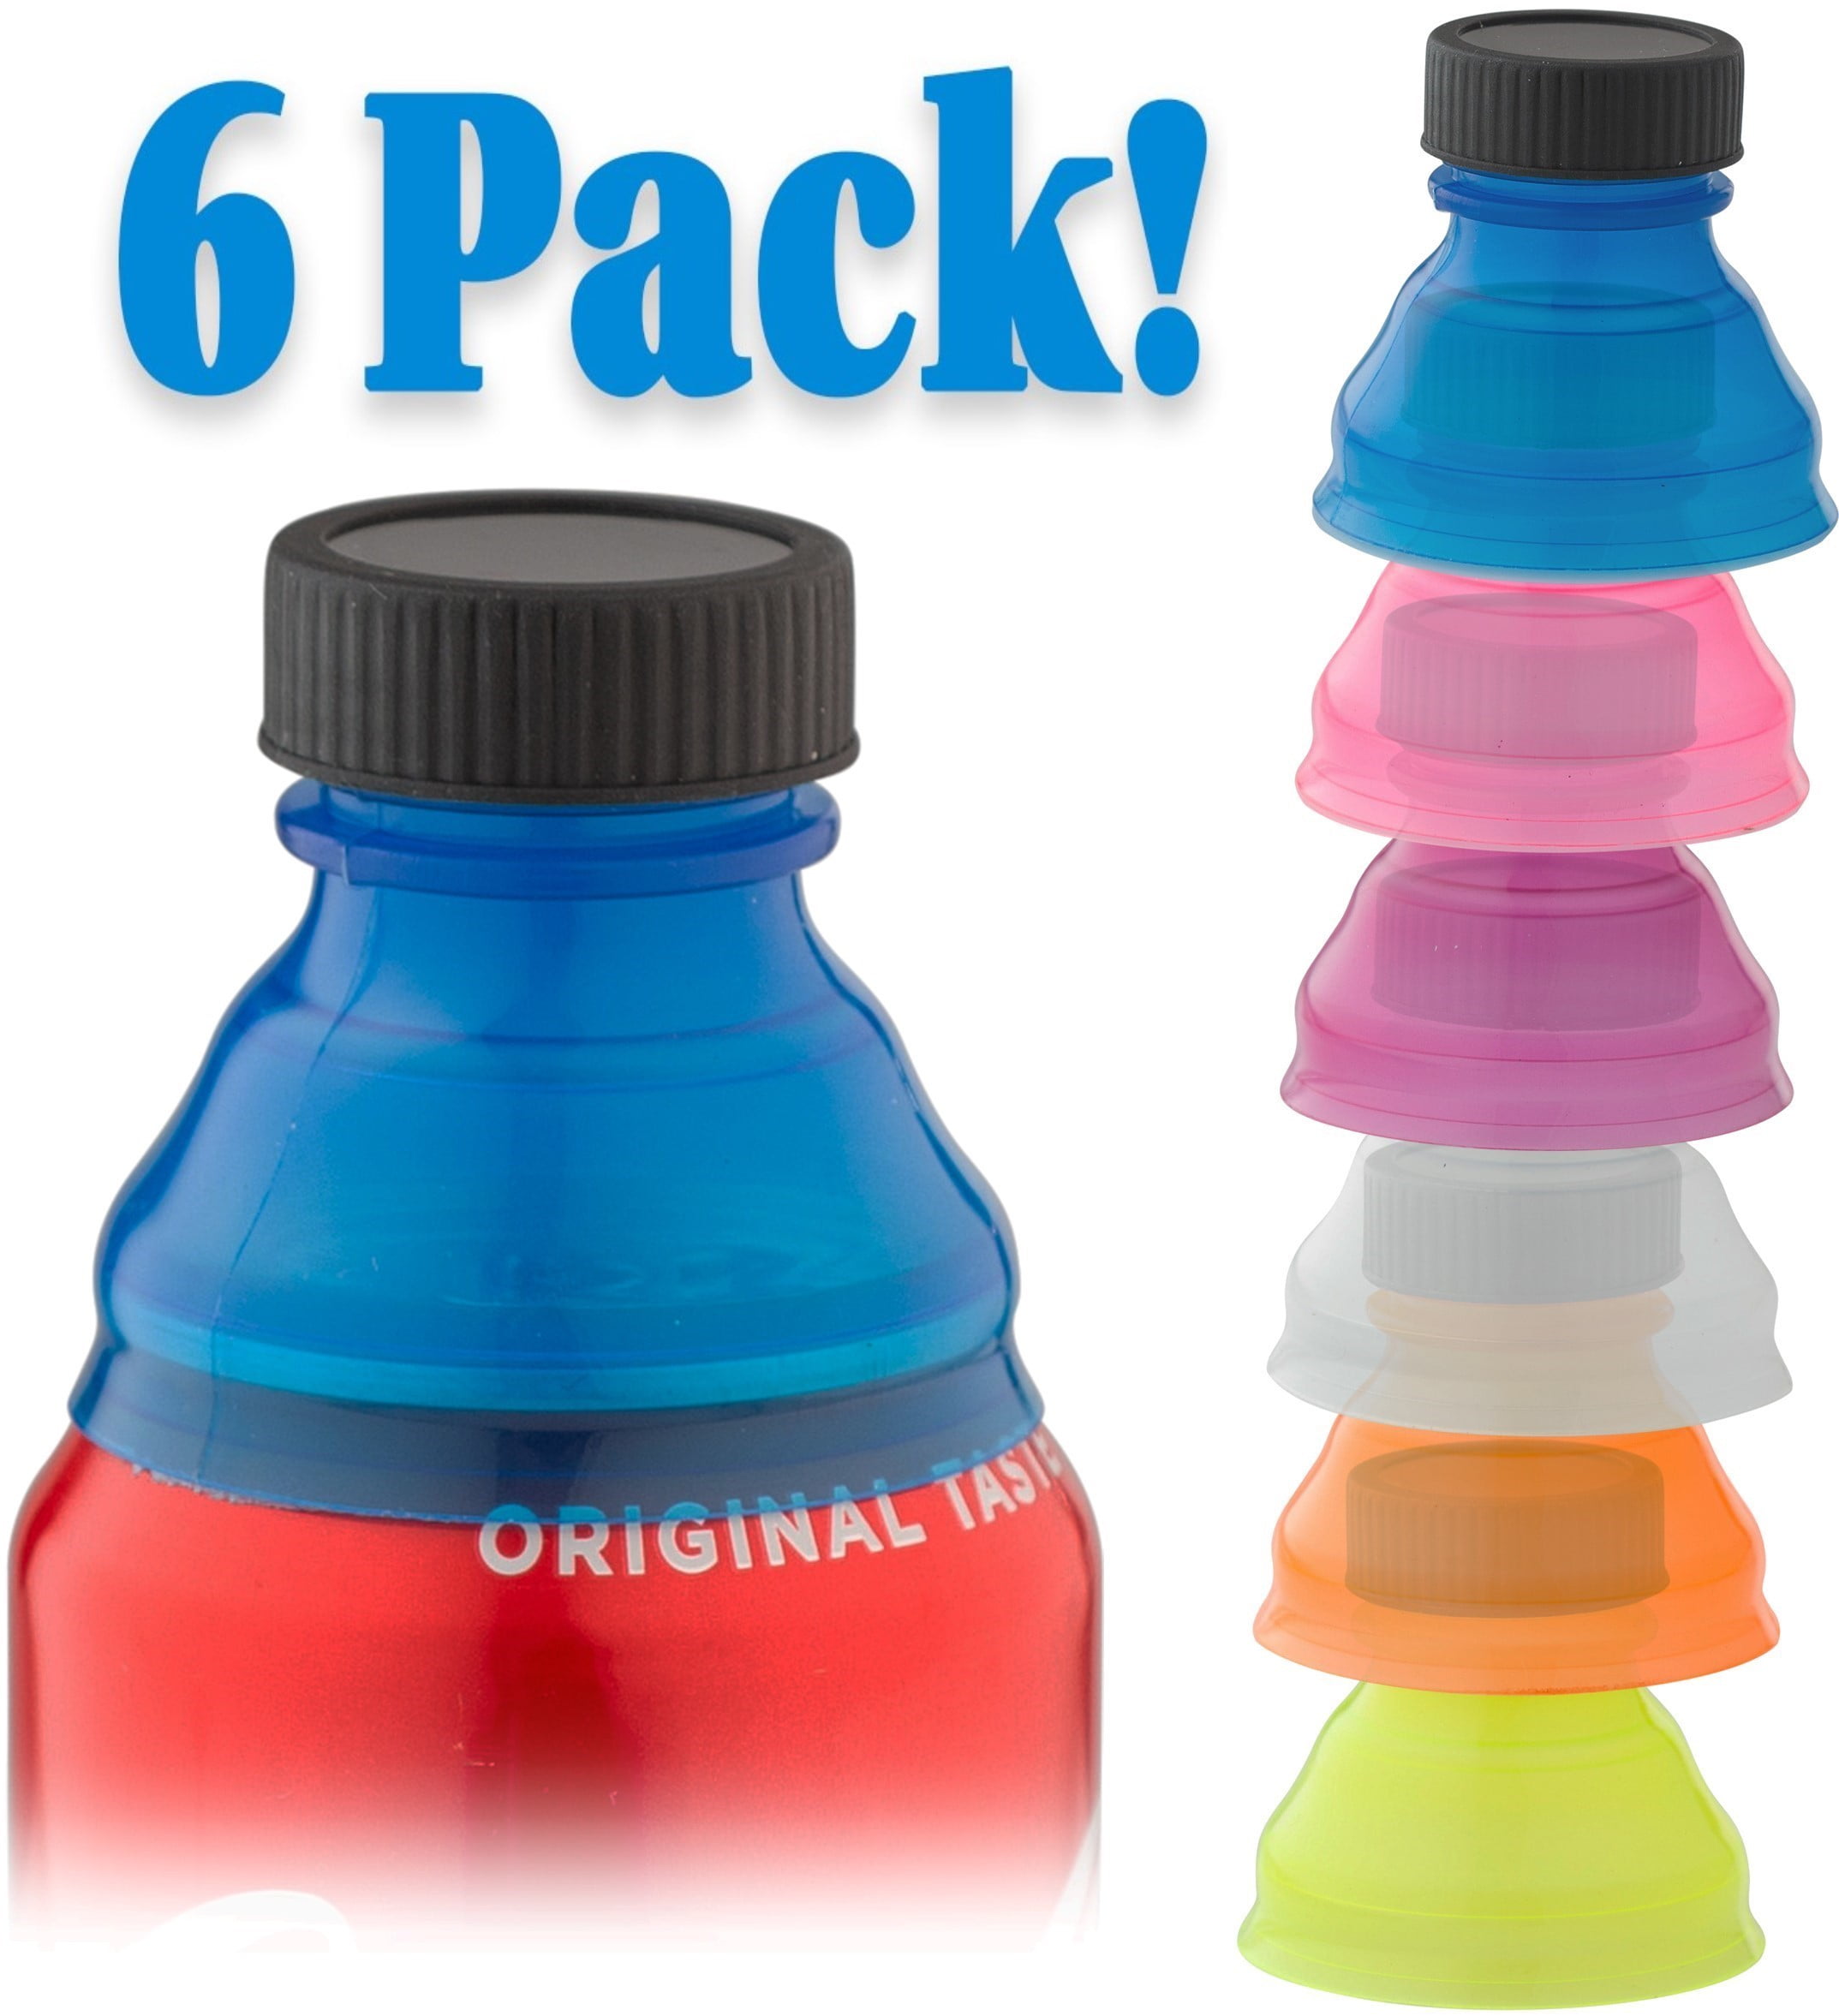  Premium Soda Can Lids - Made in the USA - 8 pack: Home